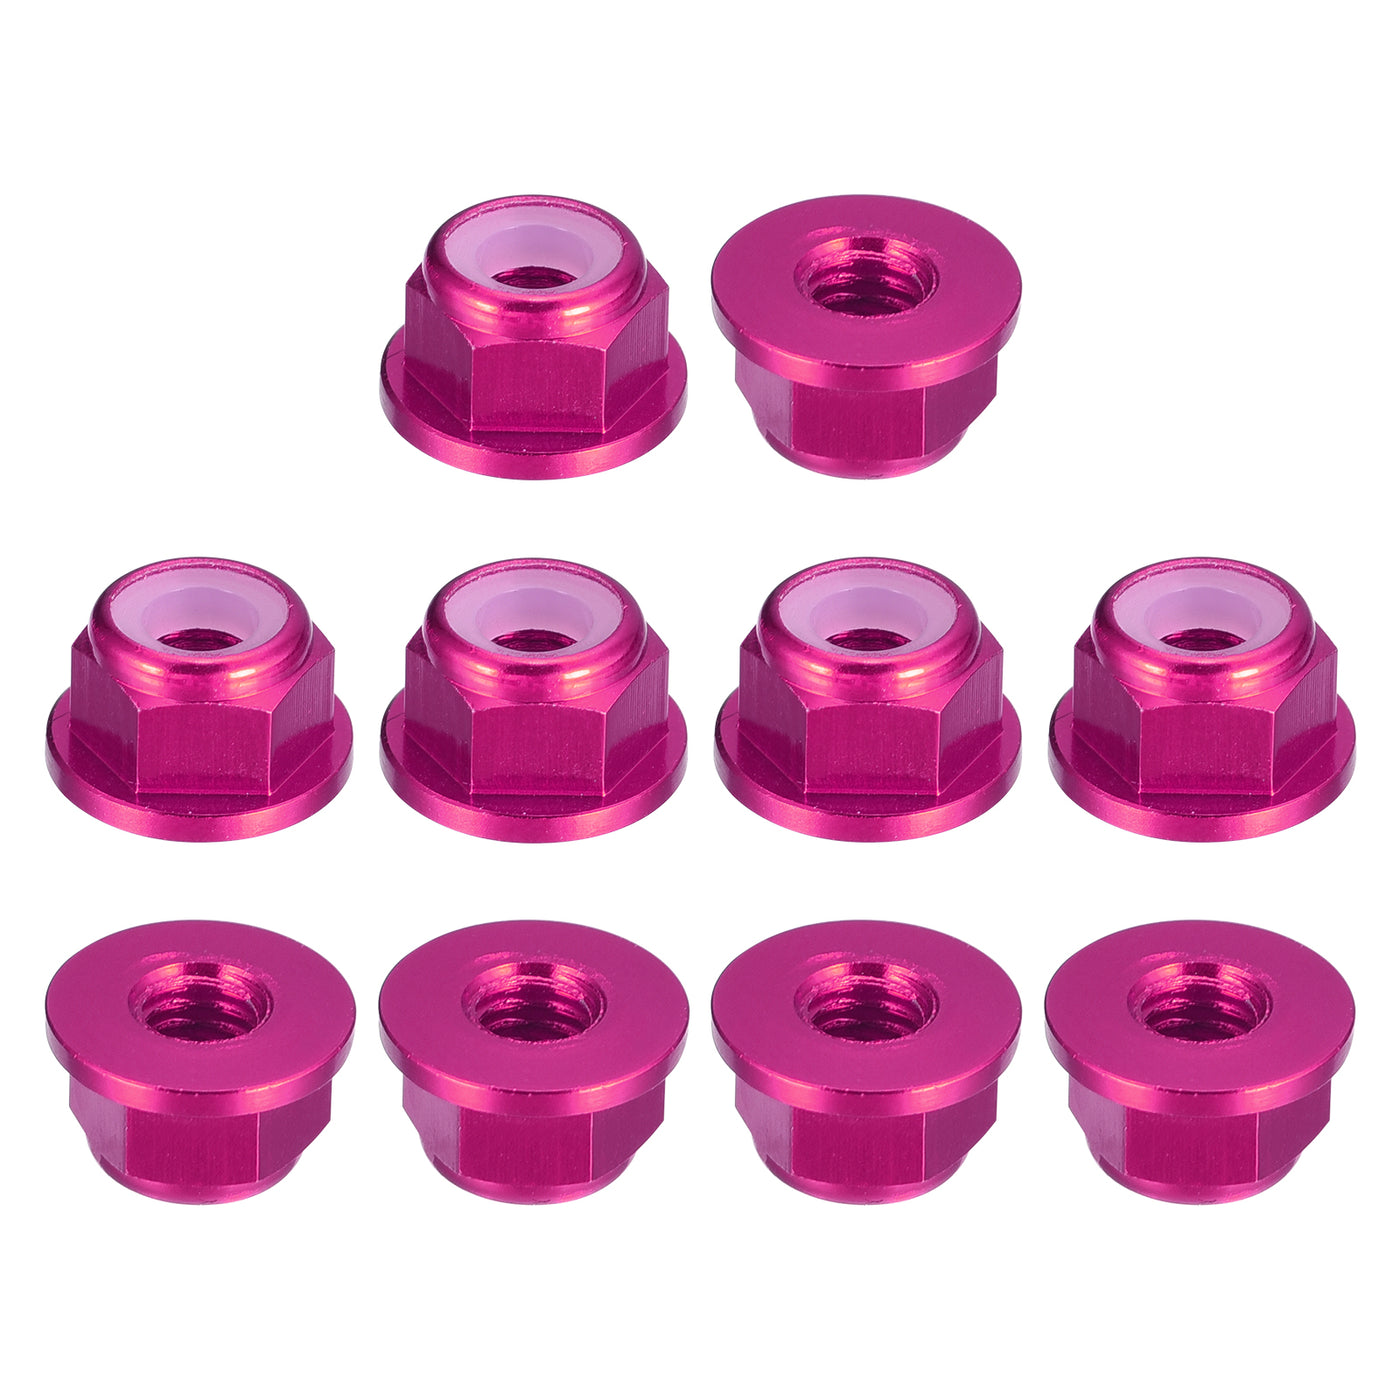 uxcell Uxcell Nylon Insert Hex Lock Nuts, 10pcs - M4 x 0.7mm Aluminum Alloy Self-Locking Nut, Anodizing Flange Lock Nut for Fasteners (Pink)